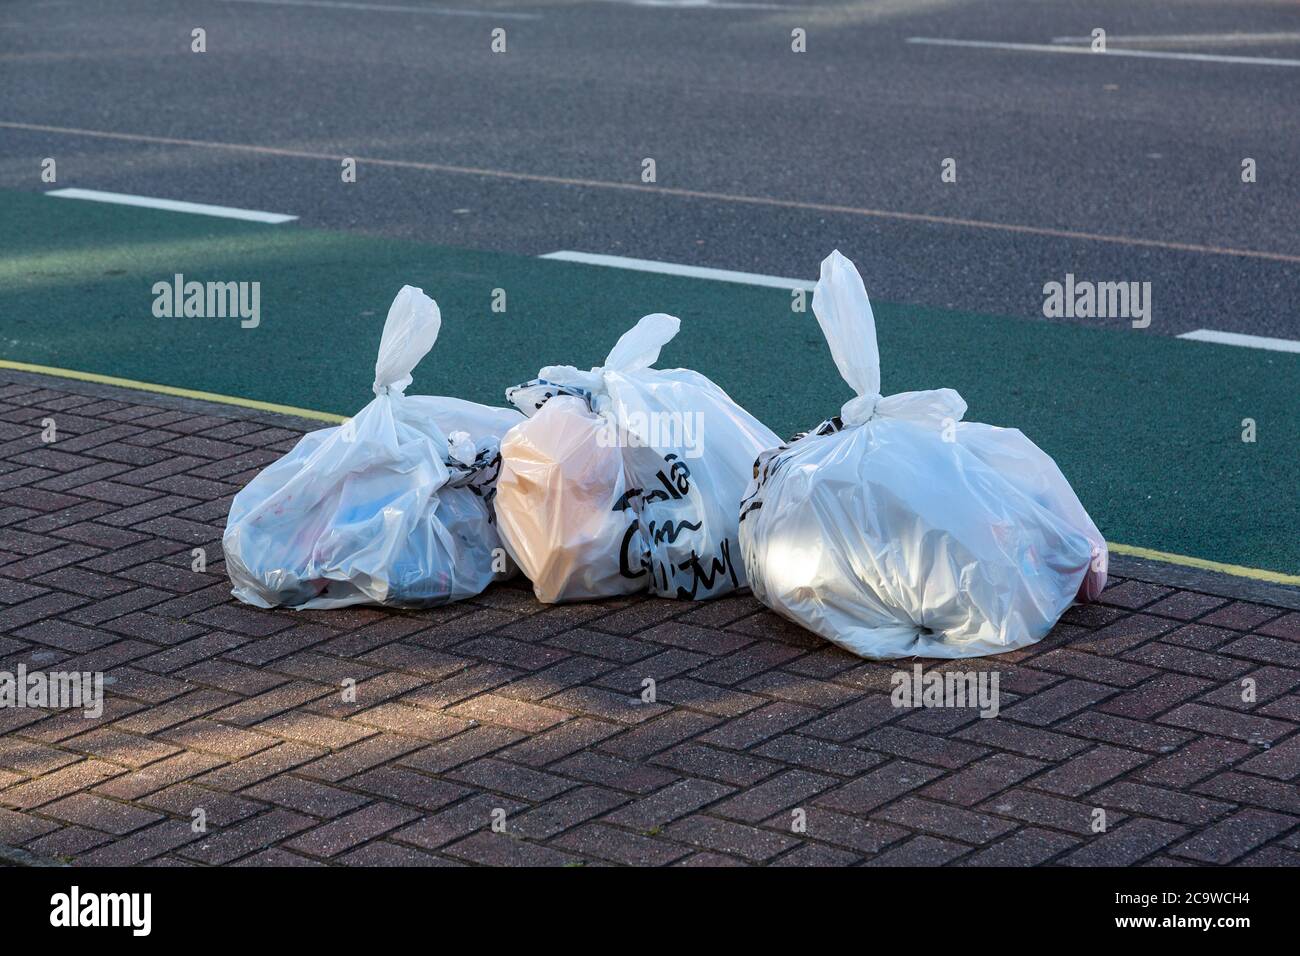 white rubbish bags or trash bags in the street ready for collection Stock Photo